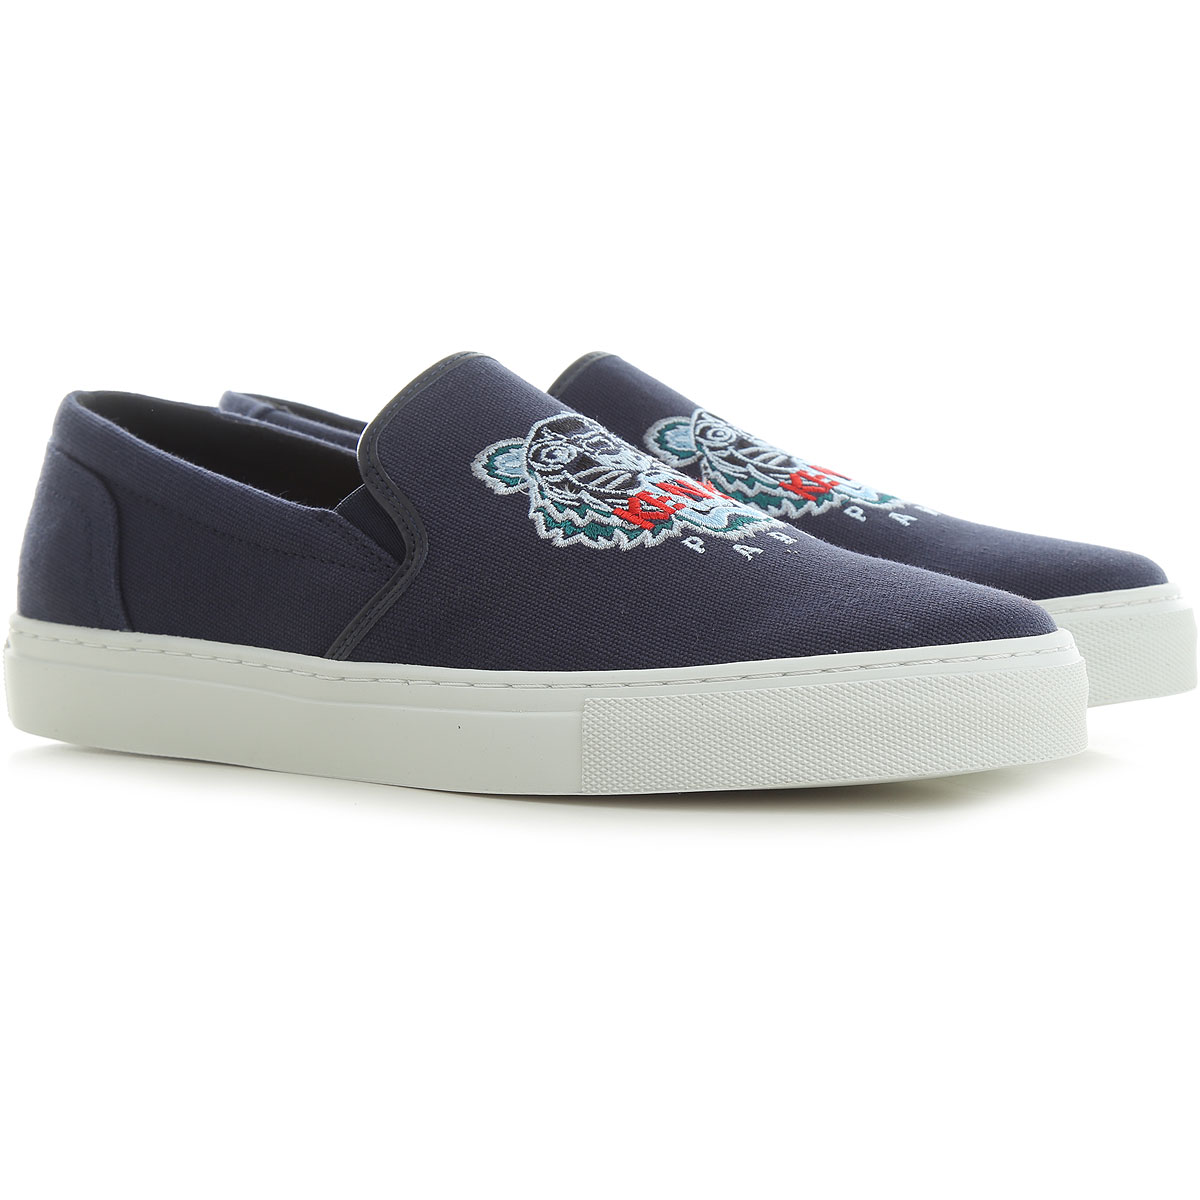 Mens Shoes Kenzo, Style code: 5sn100-f71-76